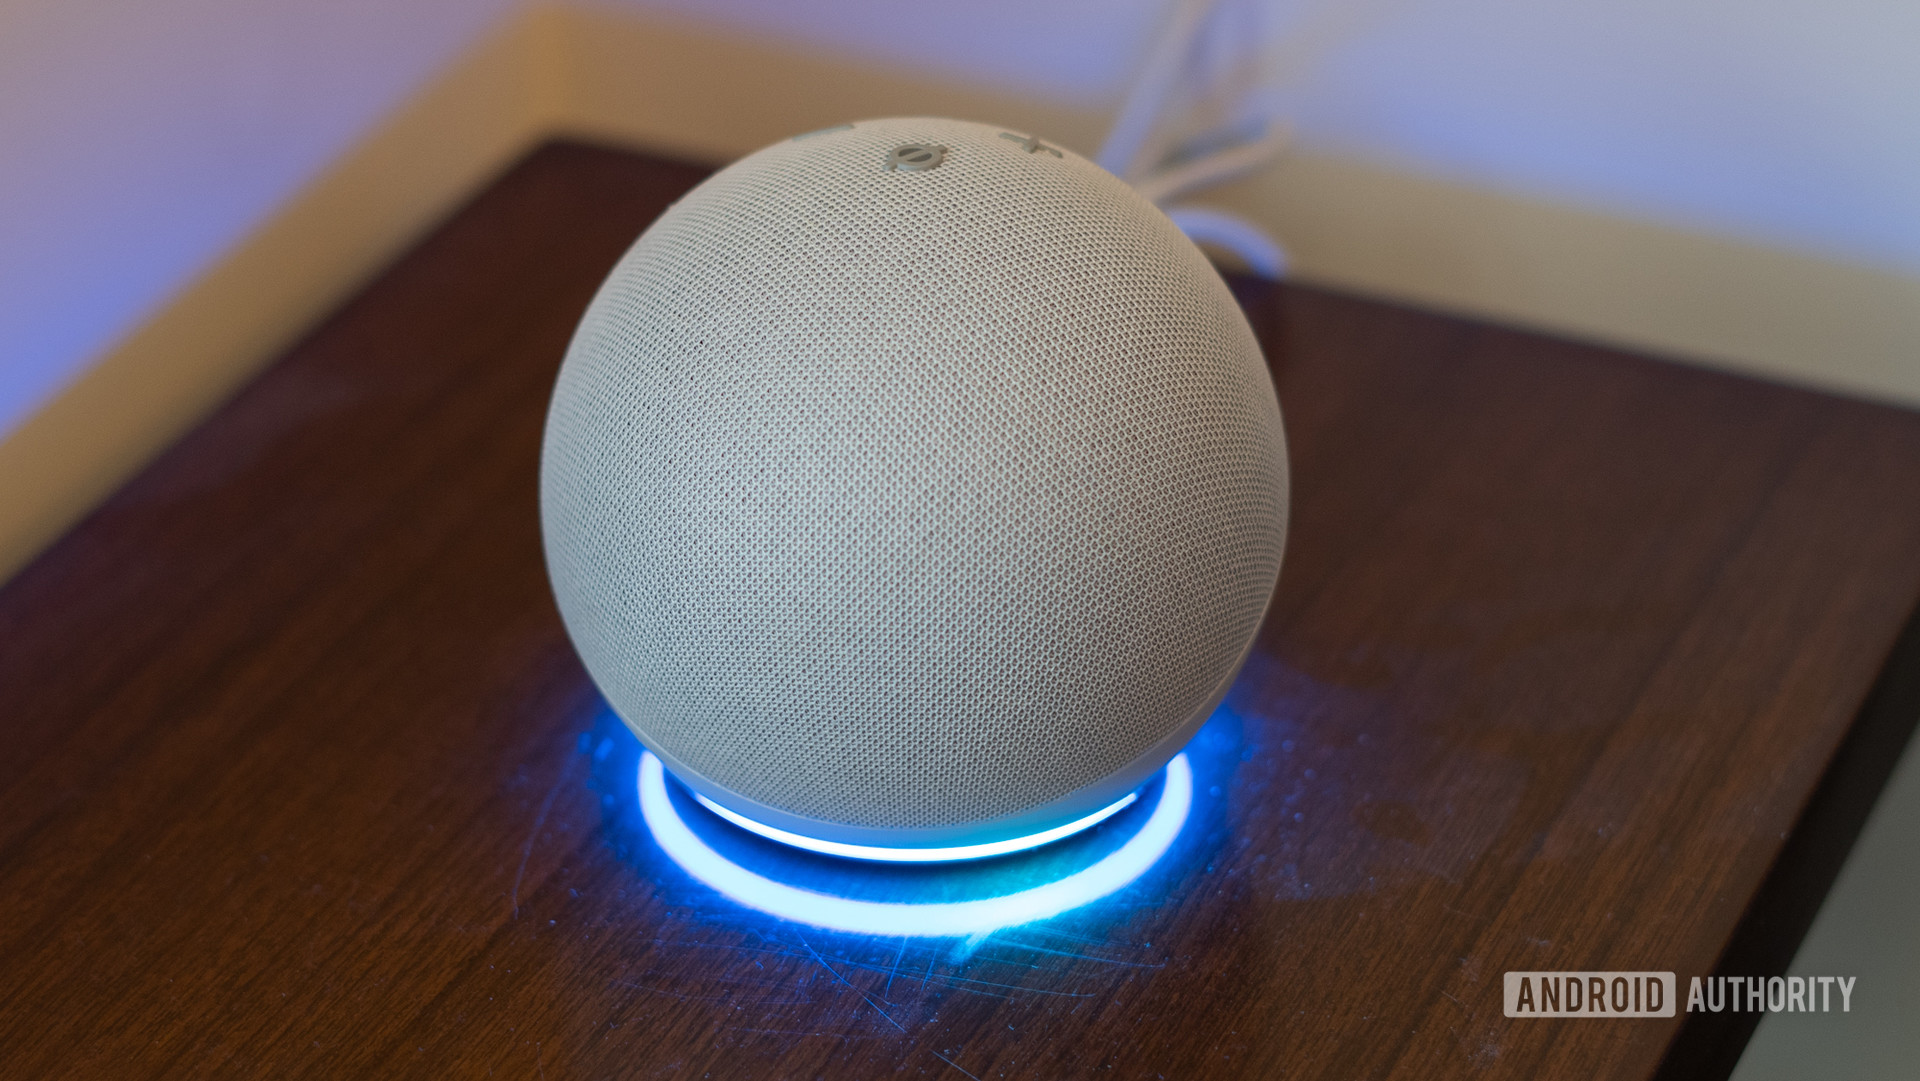 A 4th-gen Echo Dot with a blue ring active